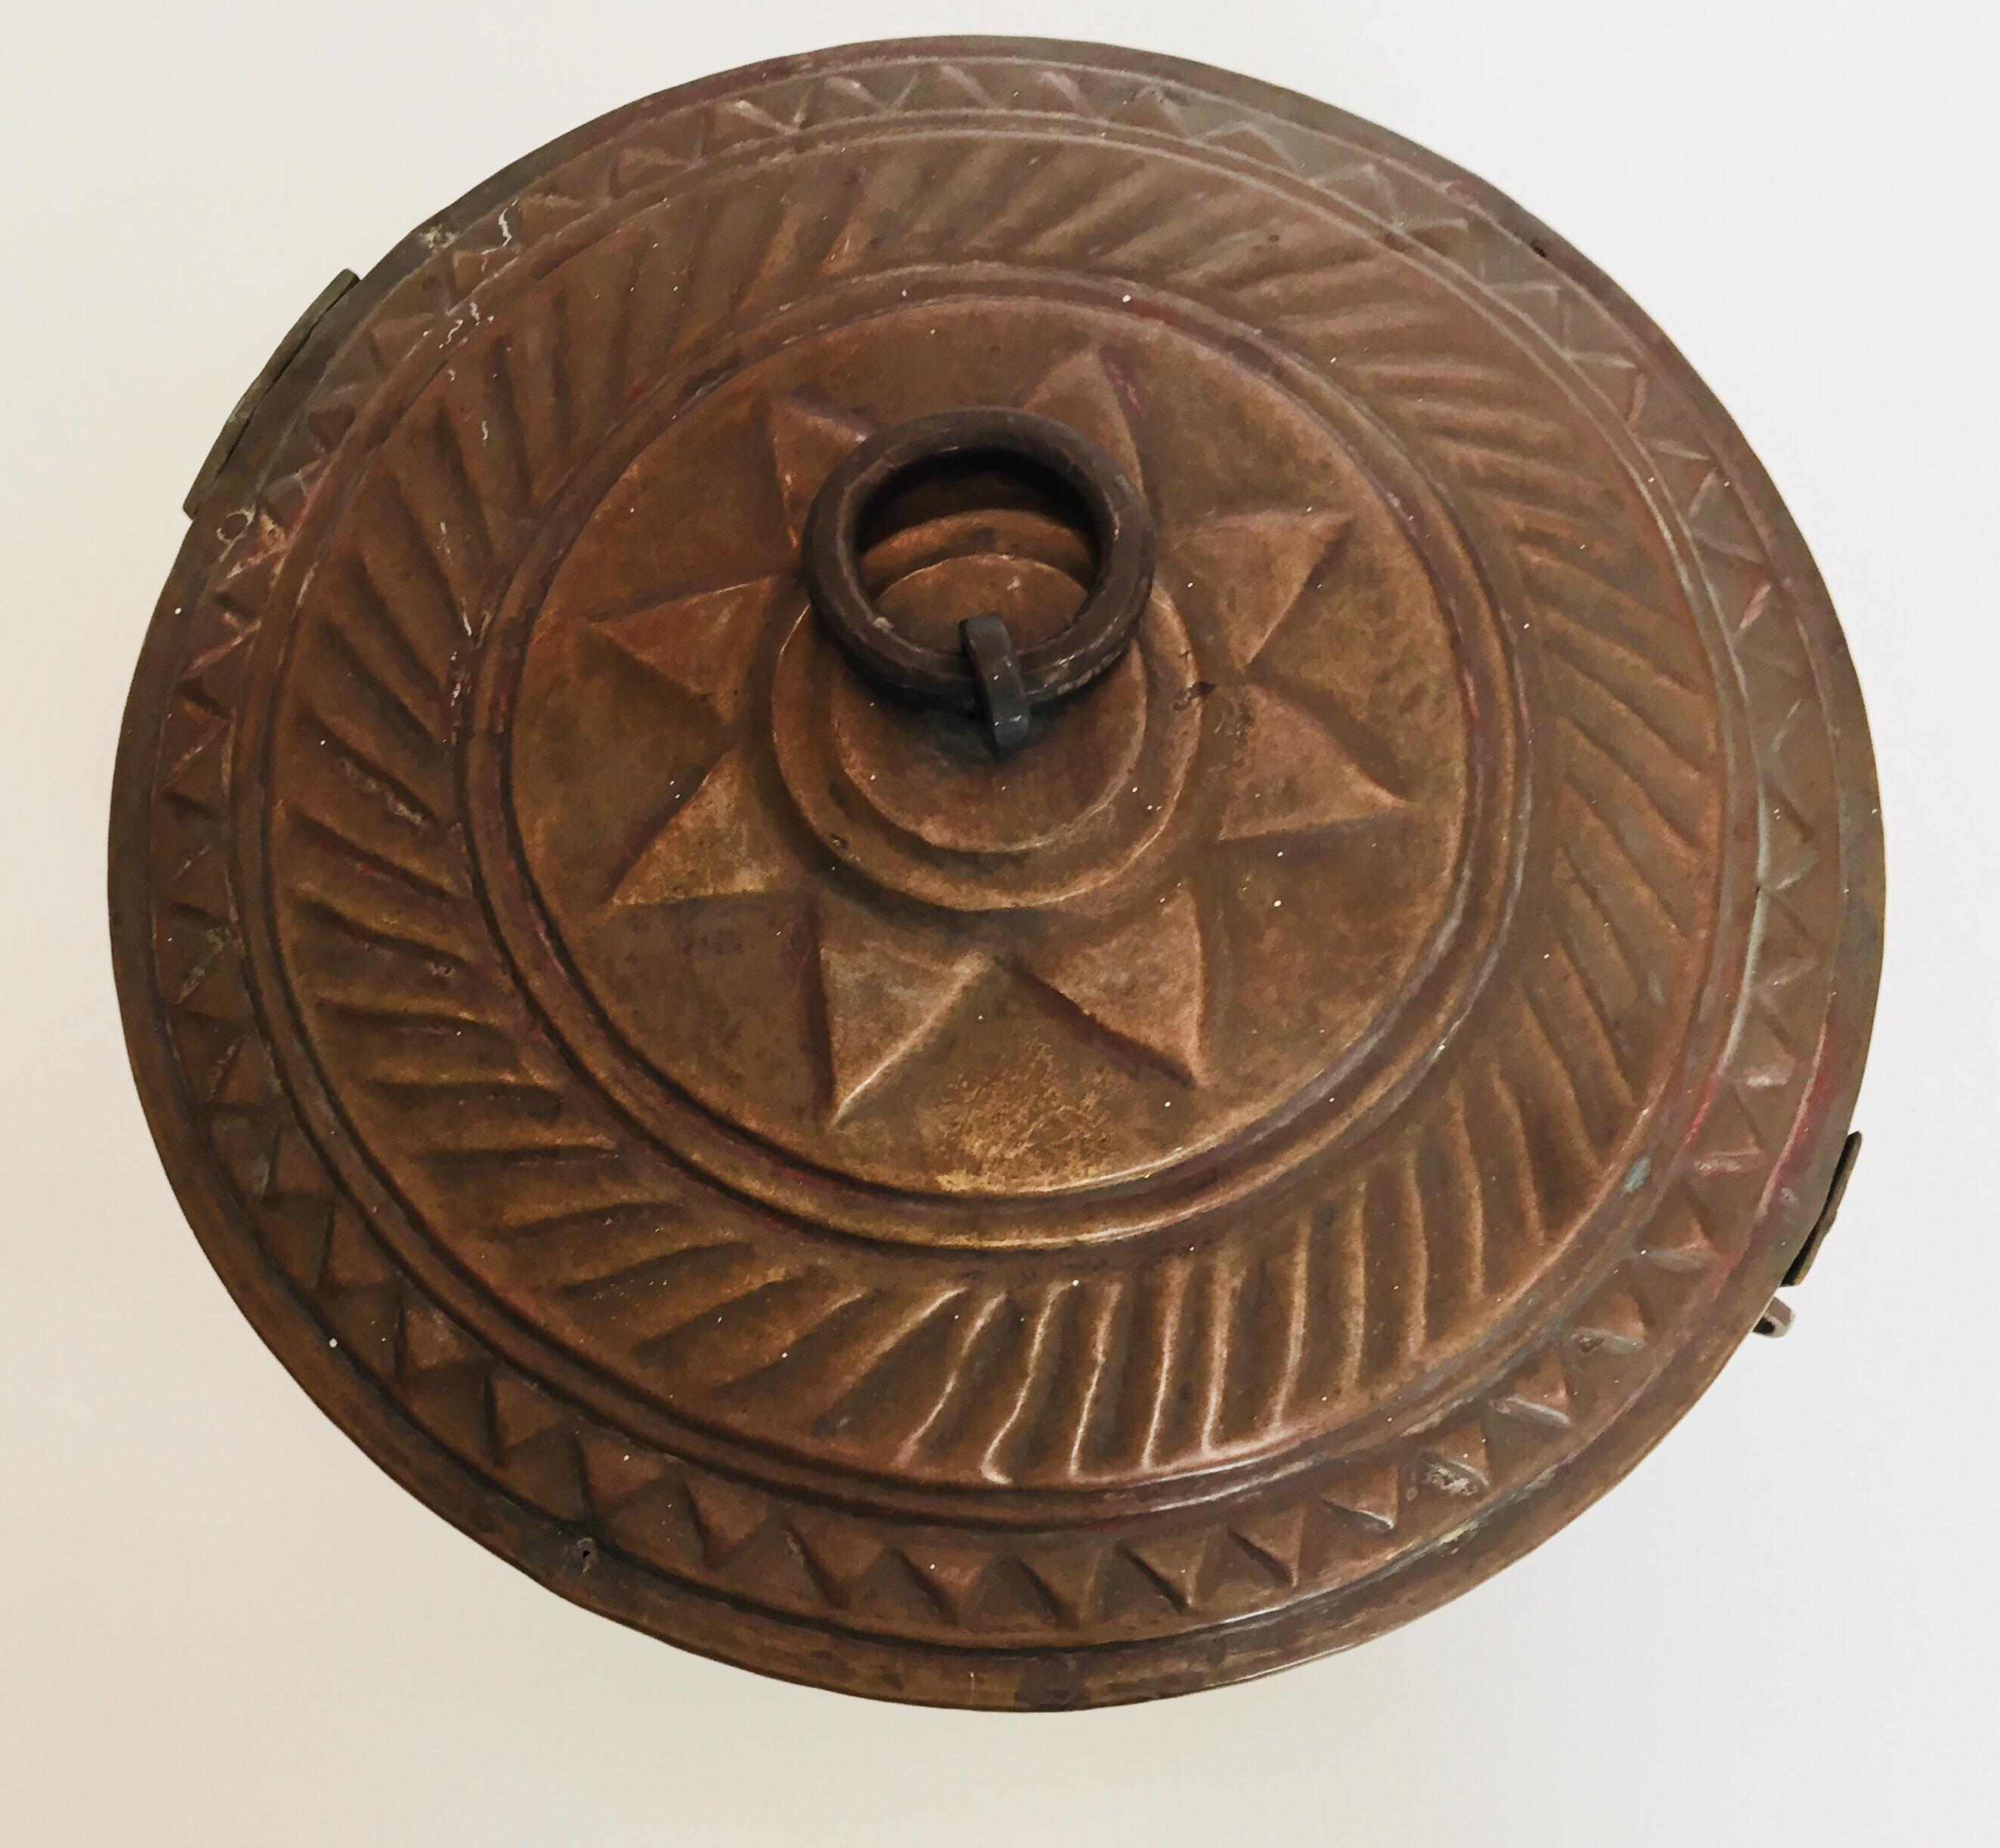 Very large beautiful vintage handcrafted decorative round copper box with lid, latch and handle
Delicately and intricately hand-hammered with geometric designs.
Hand crafted by skilled artisans from Northern India.
Crafted in metal copper brass,